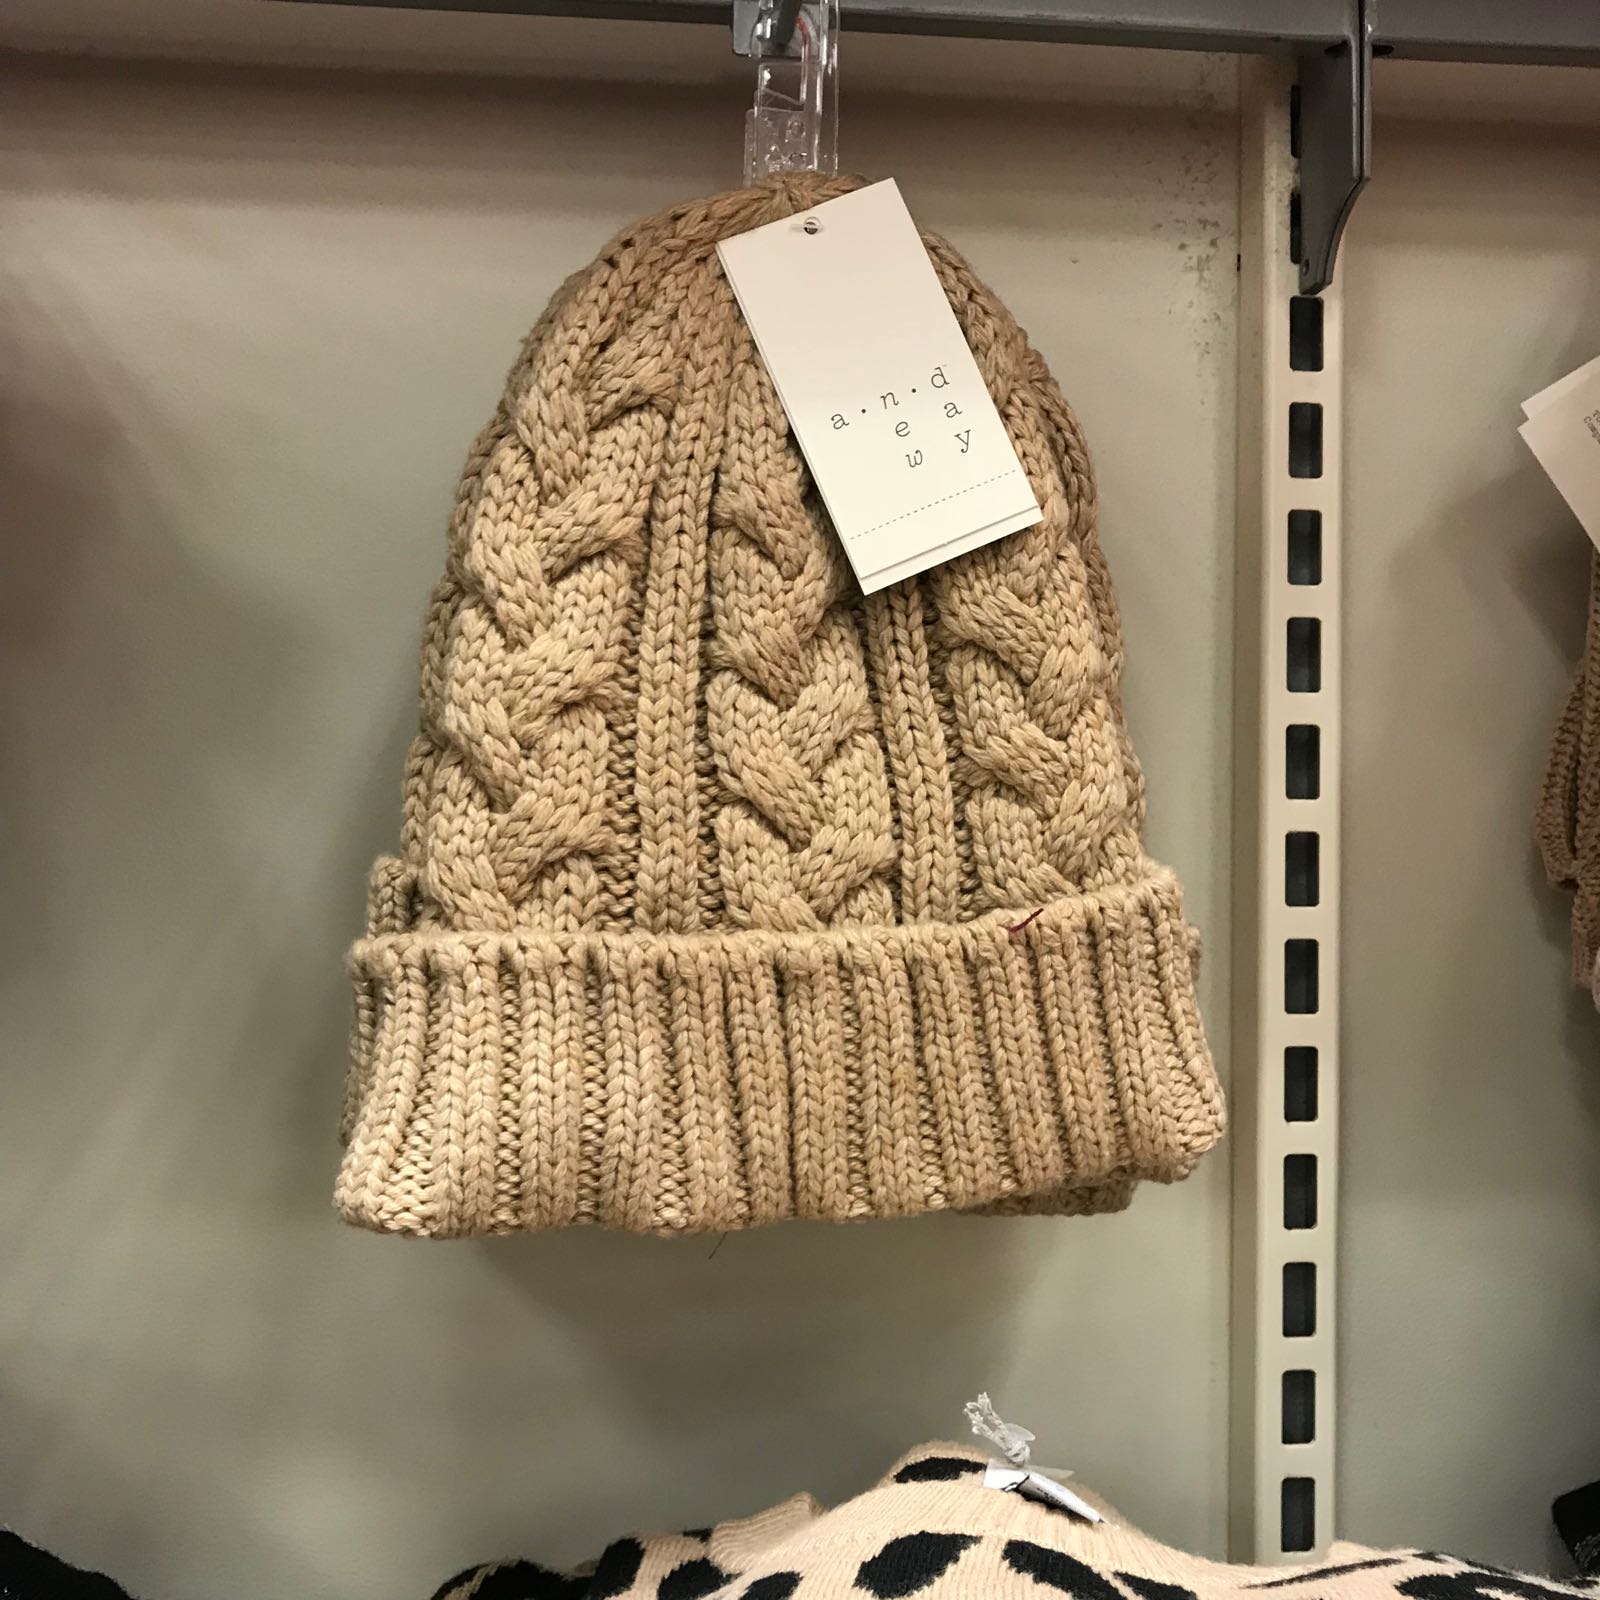 Need this for fall! At Target